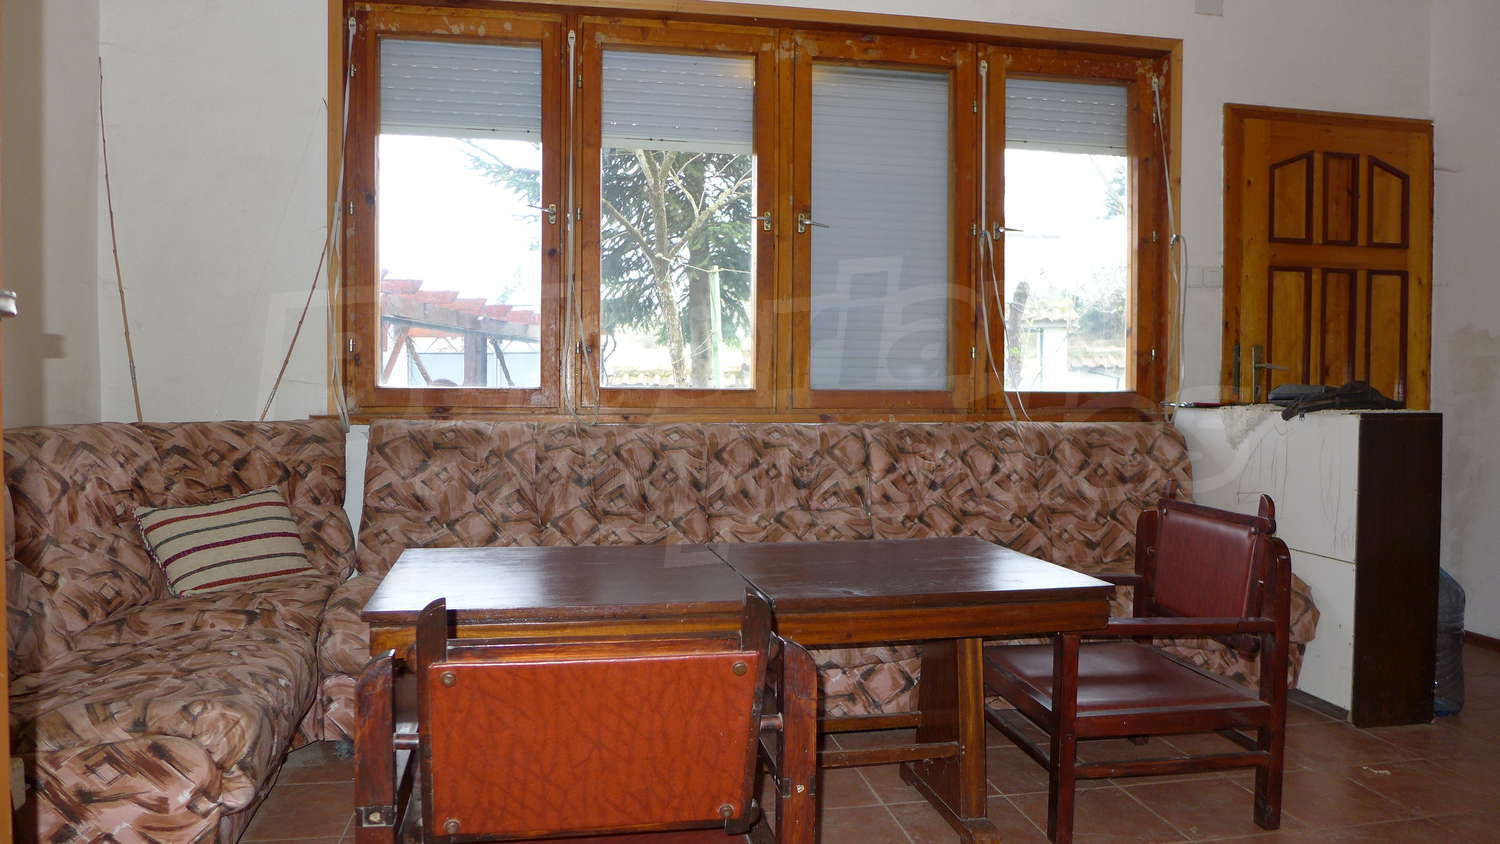 House on 4 levels with a large garden in the spa resort town of Pavel Banya near Stara Zagora